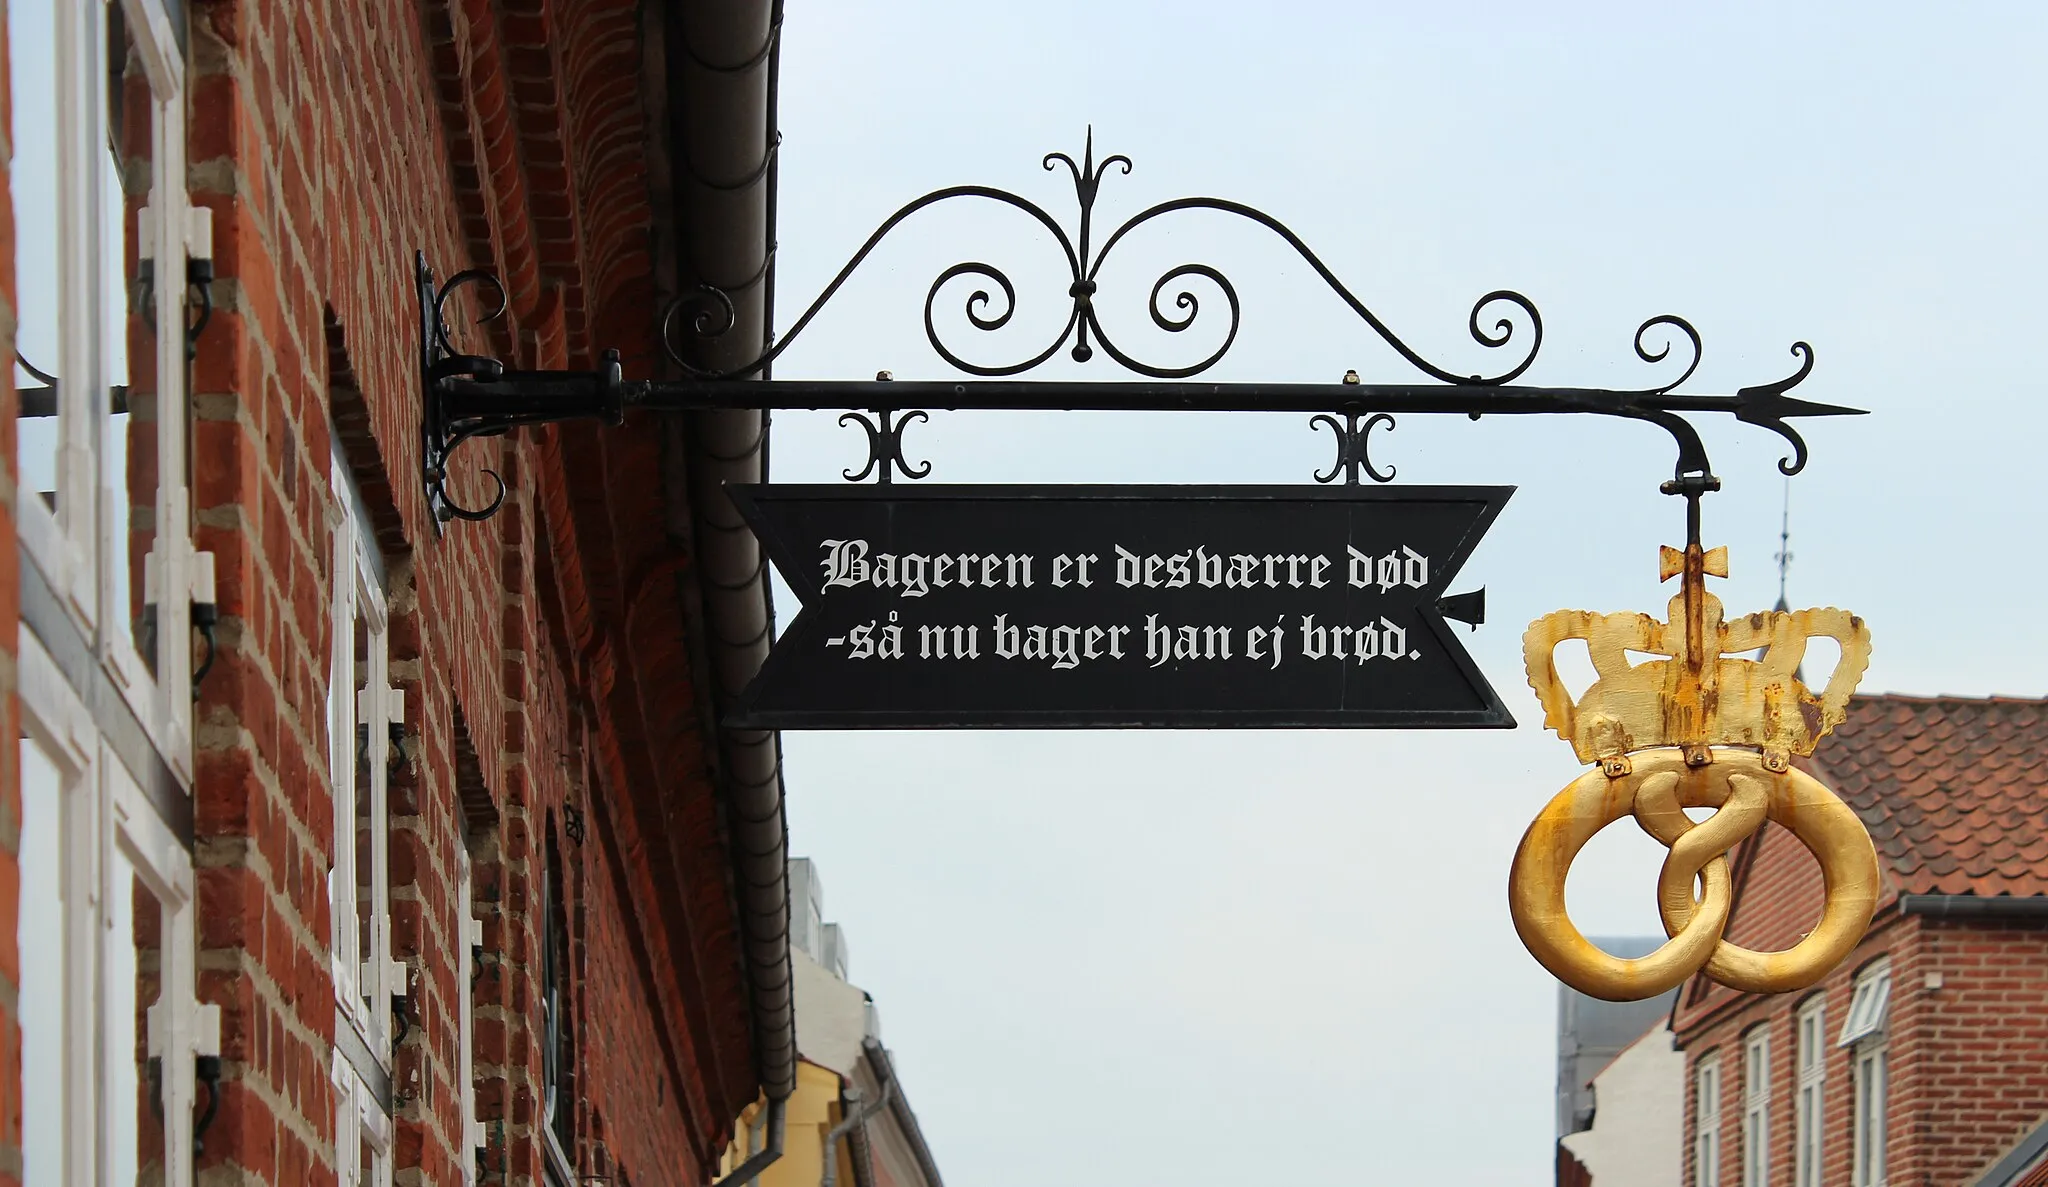 Photo showing: The well known sign on Zahrtmanns Gård, Sct. Mogens Gade 26, Viborg, Denmark from 1972 or 1973. The text translates to "The baker is unfortunately dead - so now he is not baking bread" and originates from the Danish author Peter Seeberg.